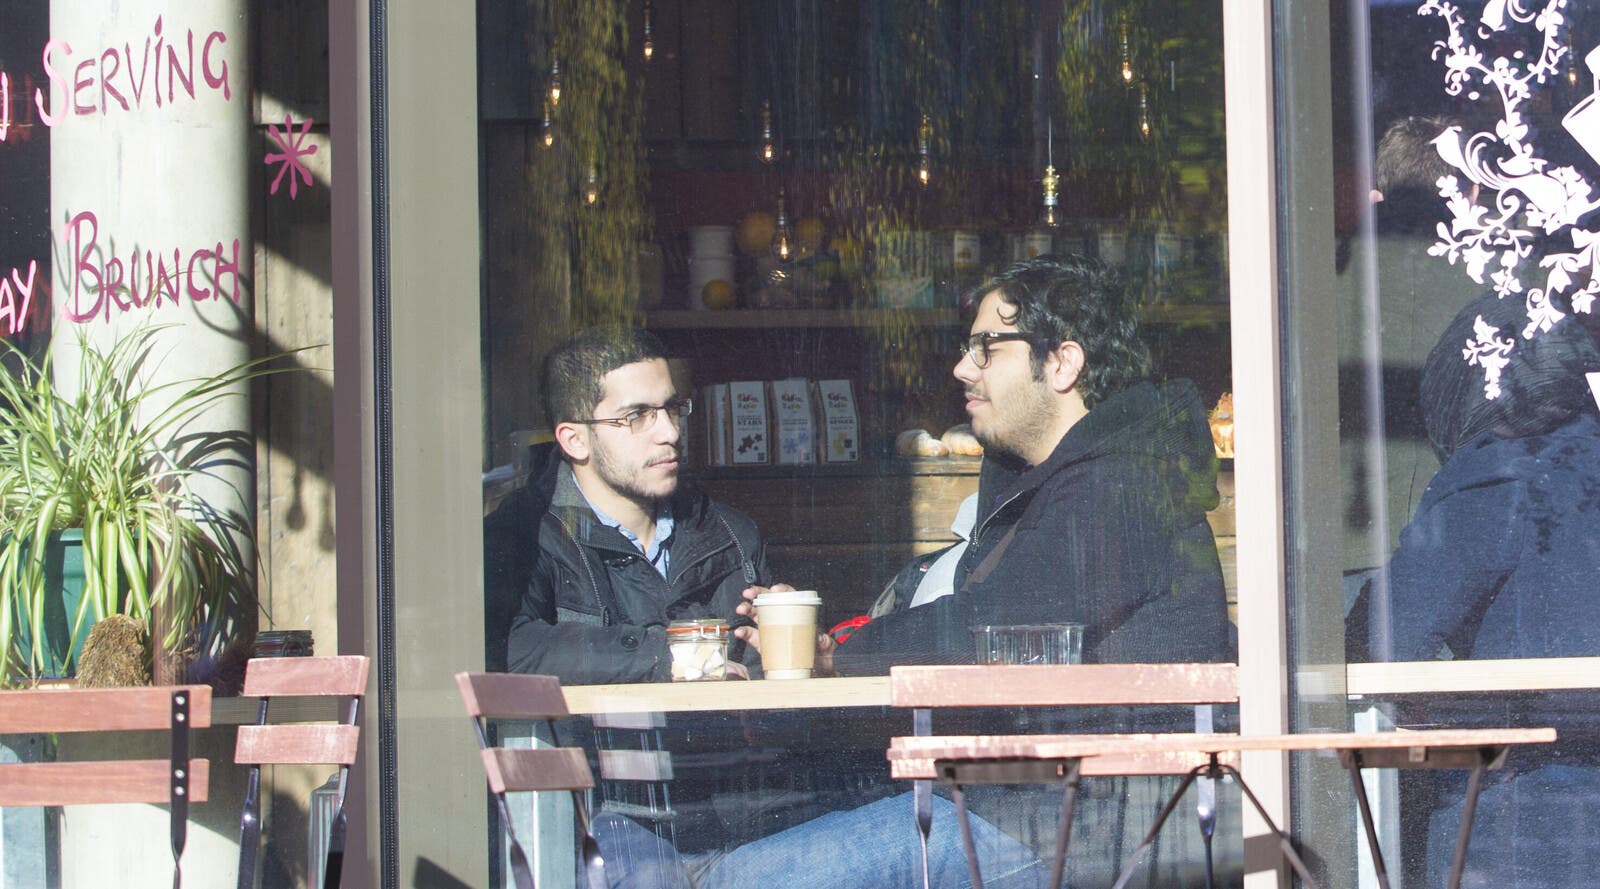 Two students sitting at a cafe